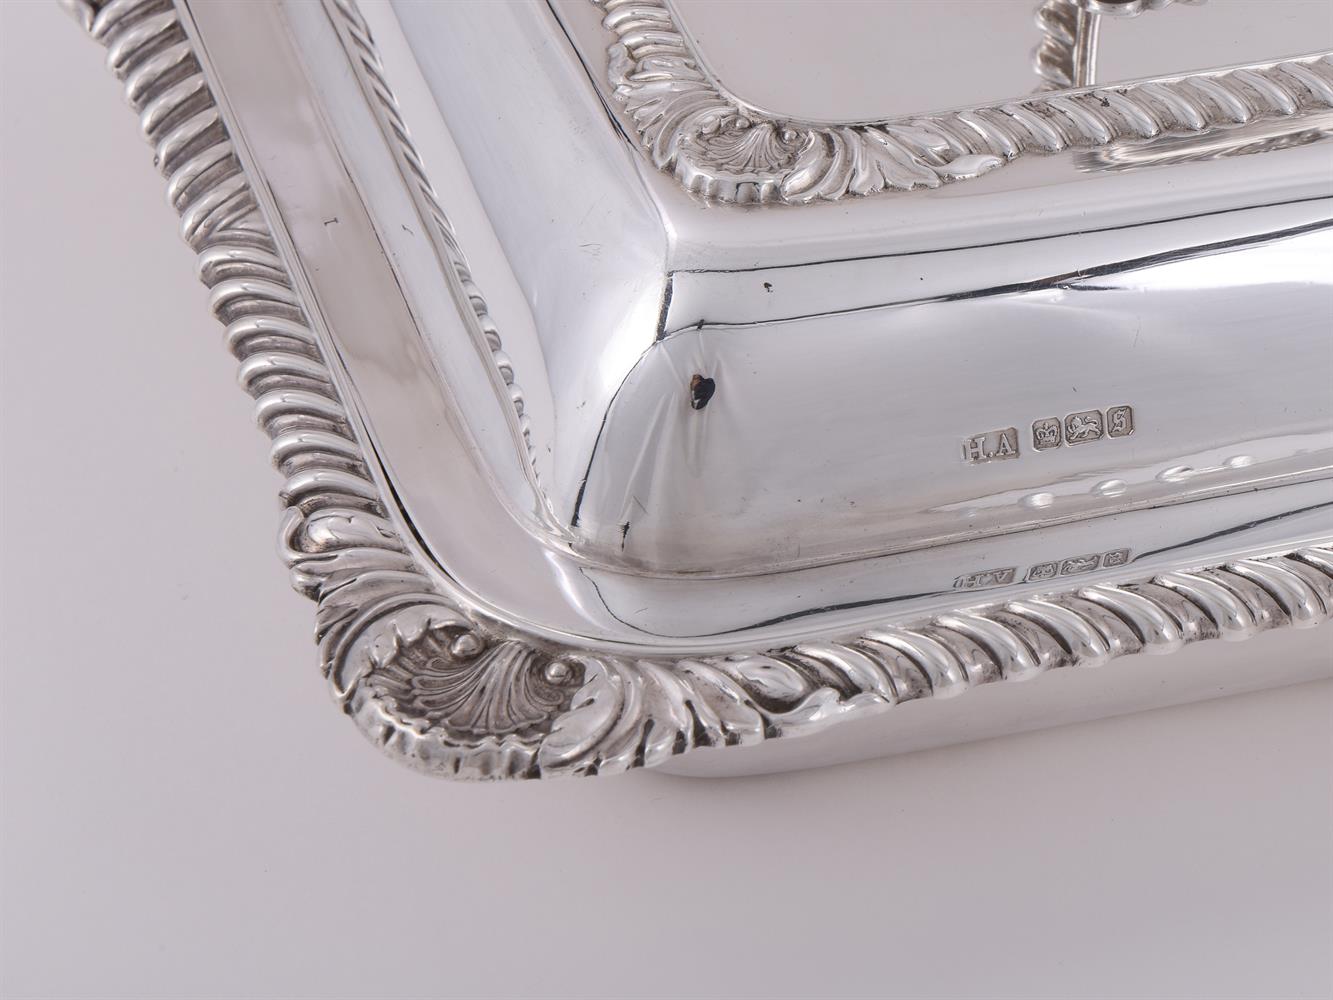 A SILVER RECTANGULAR ENTREE DISH, COVER AND HANDLE - Image 3 of 3